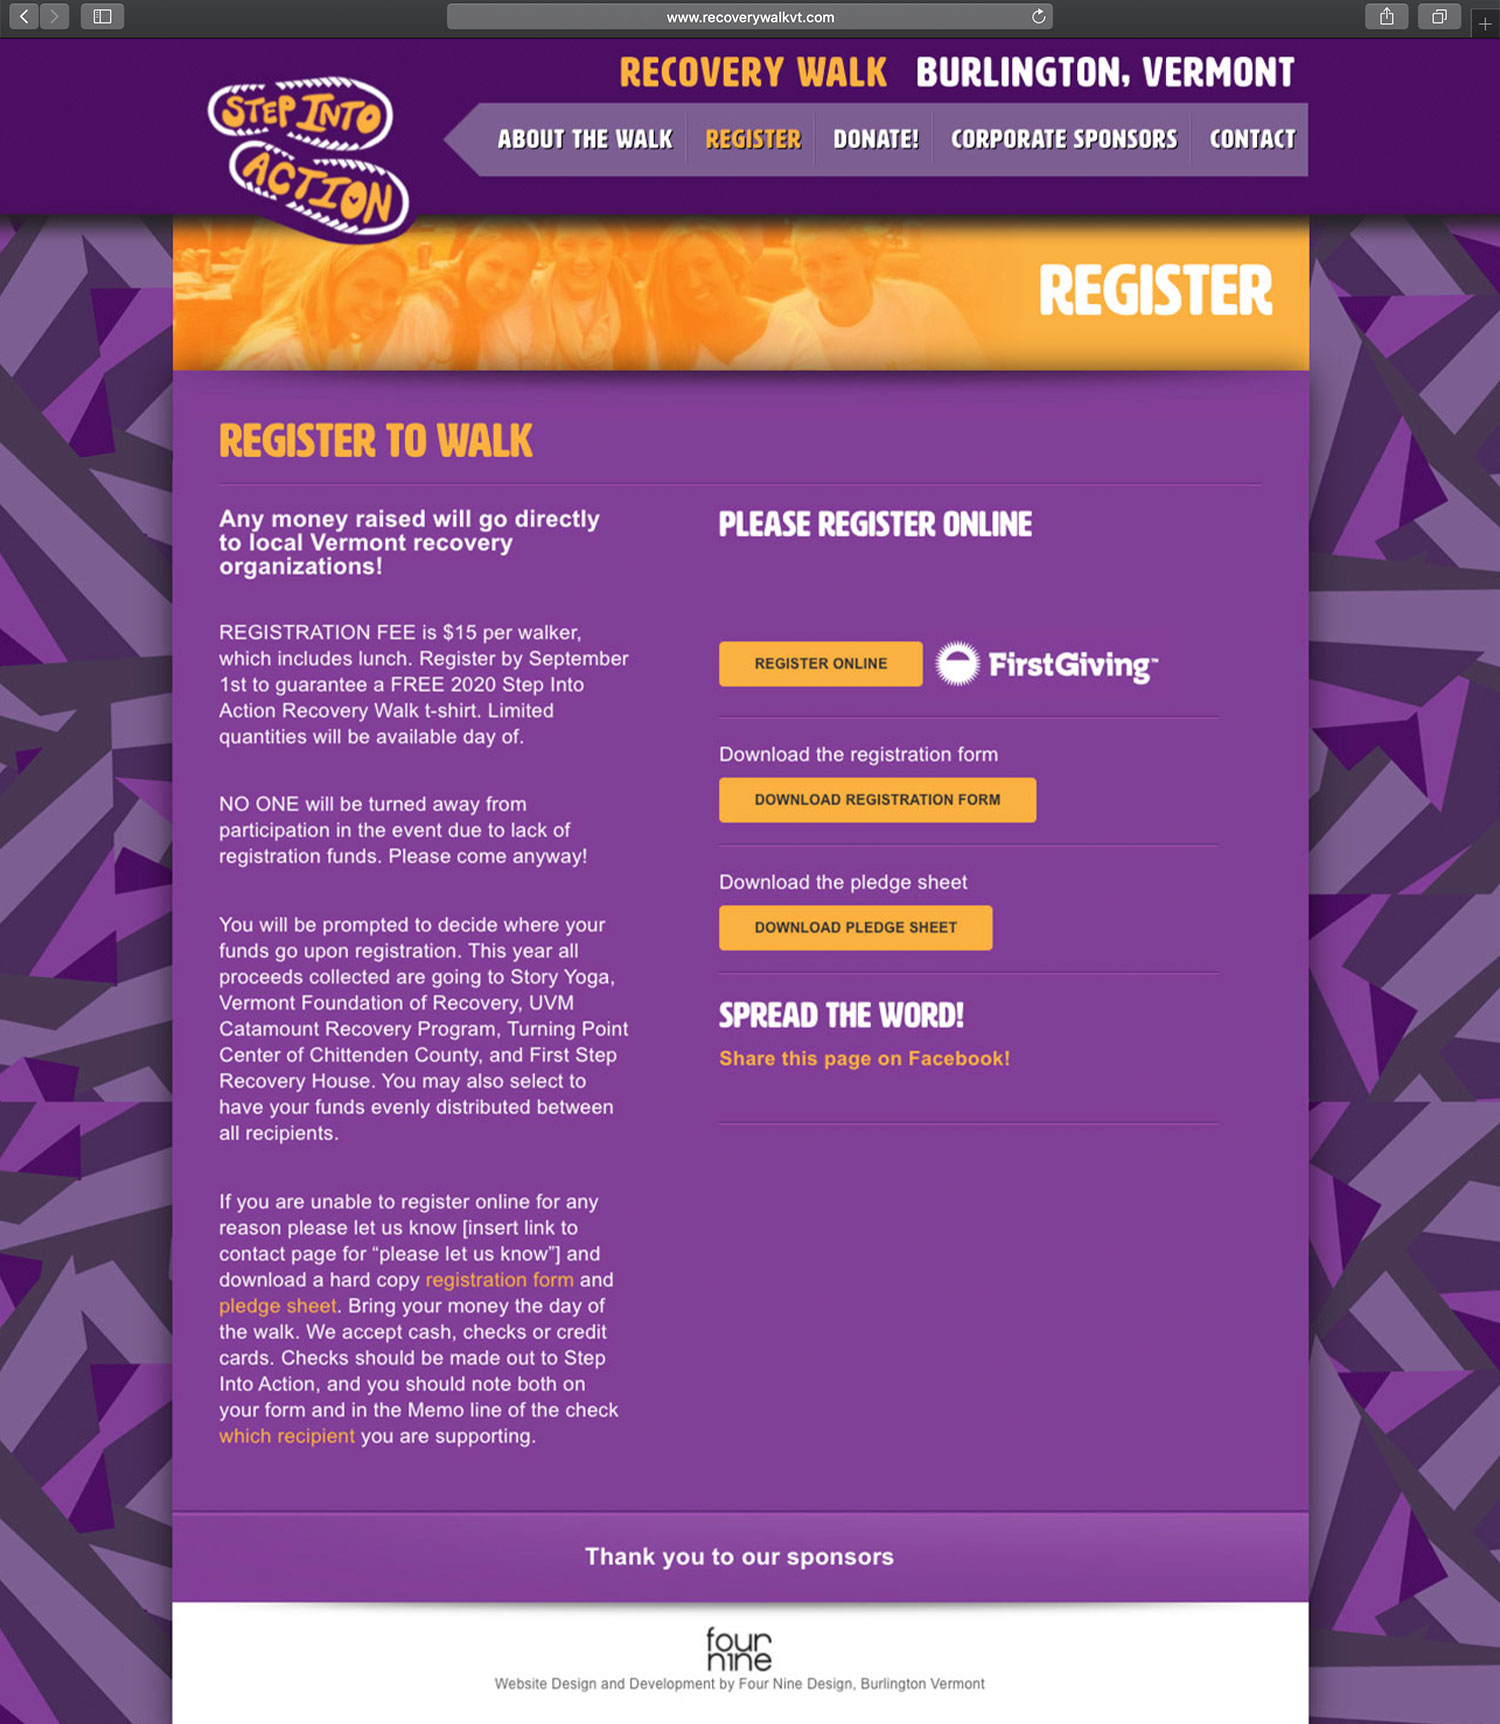 Website design and website development for Step Into Action Recovery Walk - secondary page view.